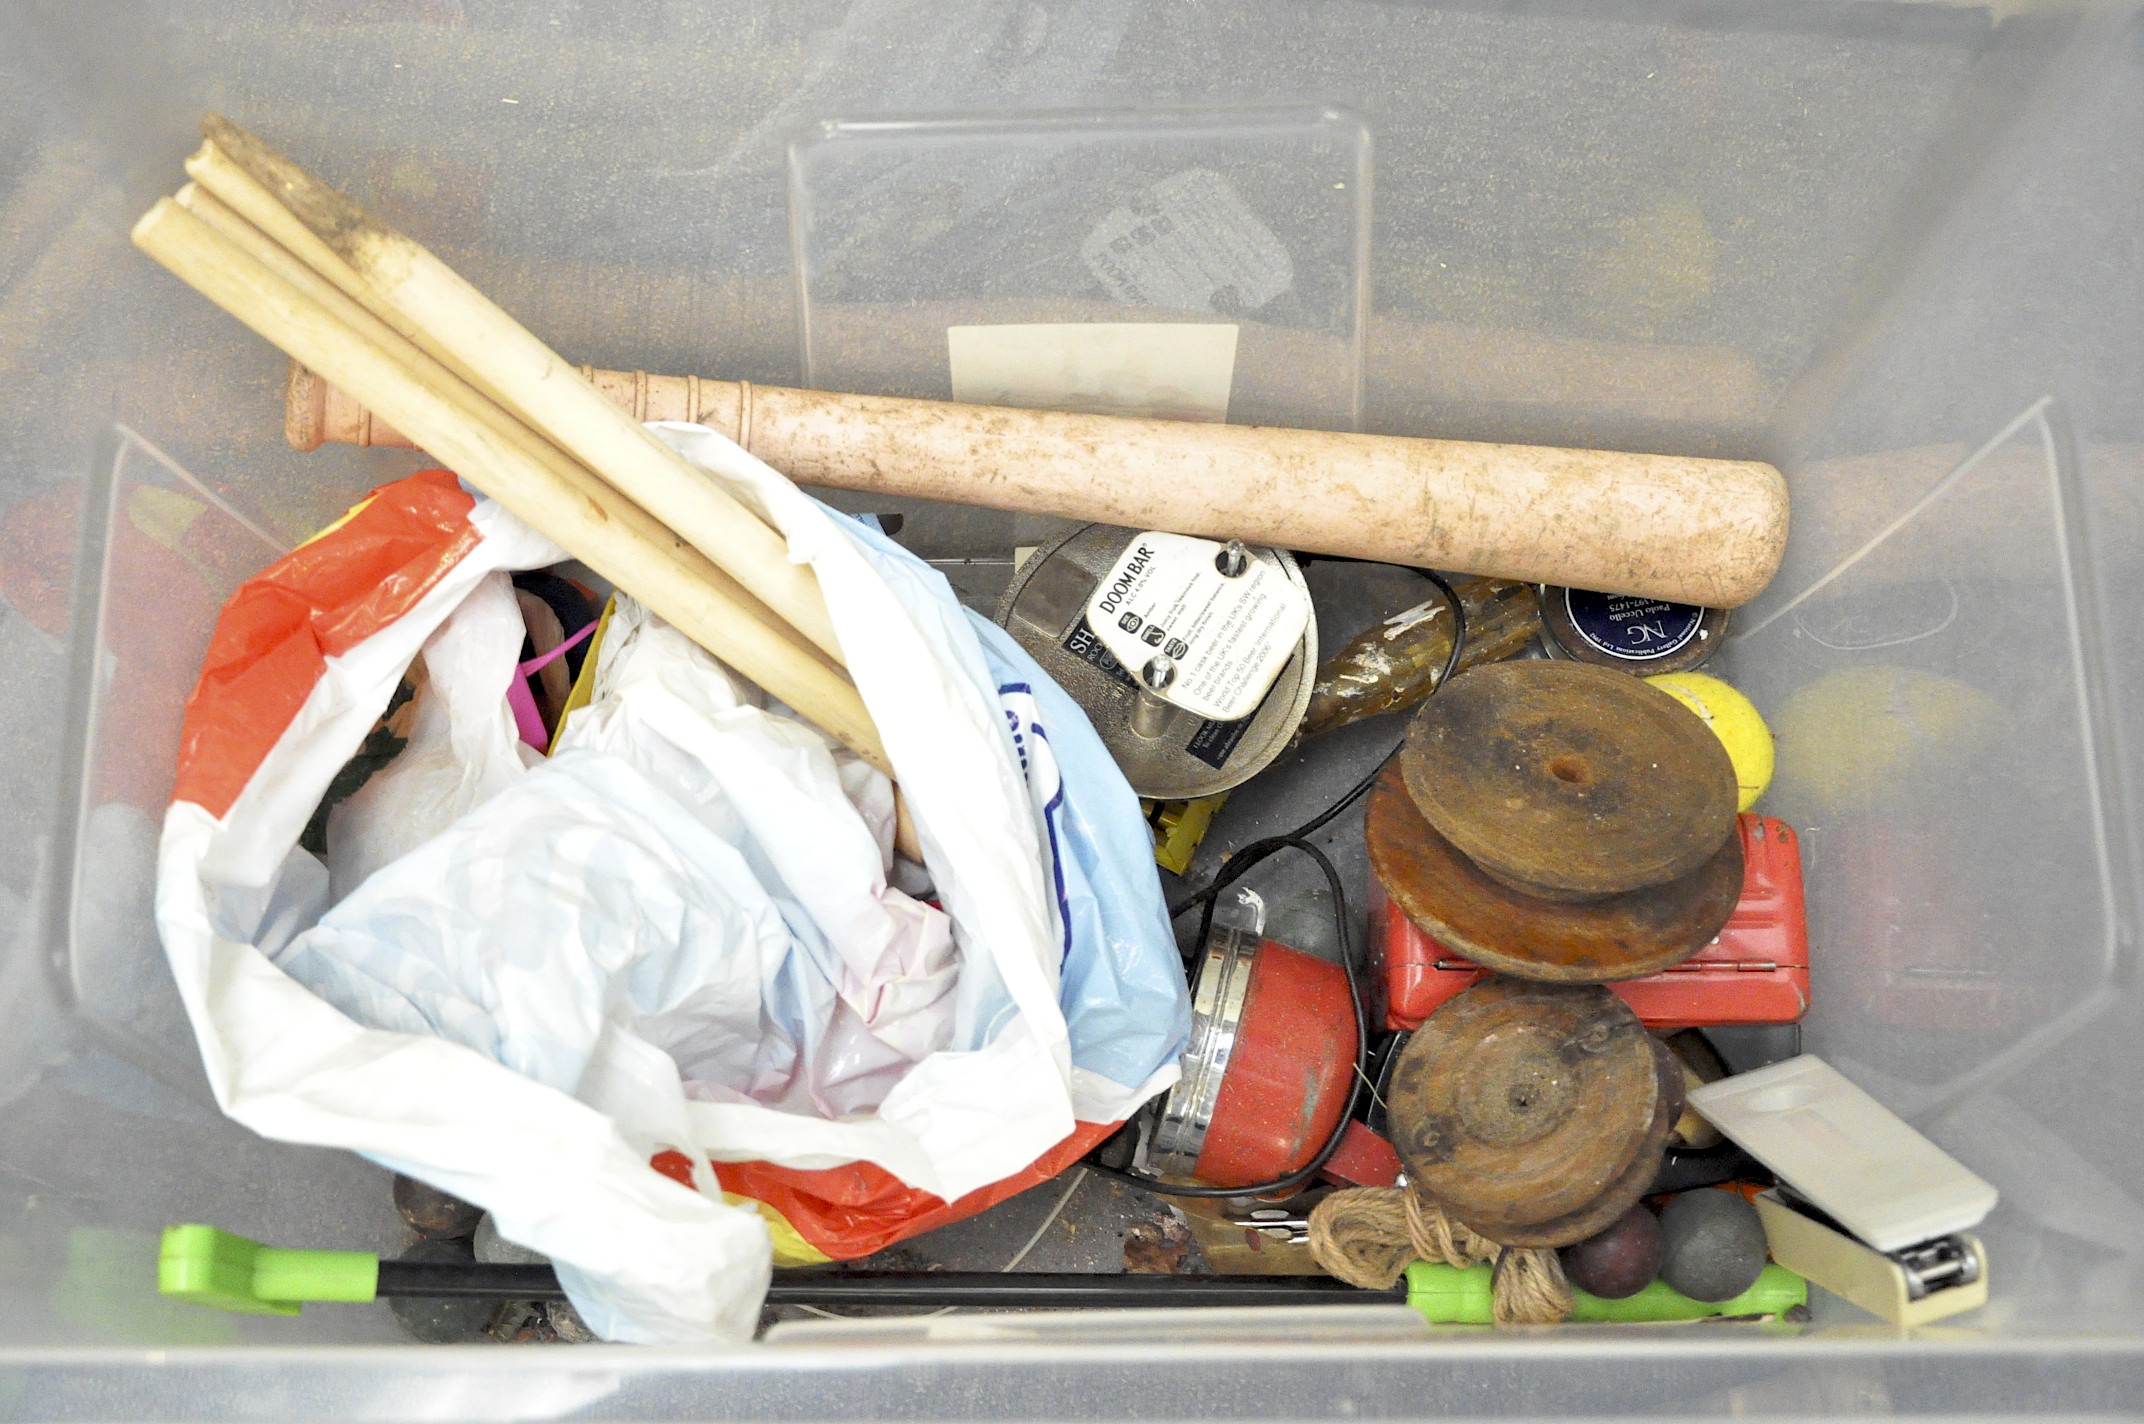 A cricket bat and stumps together with other sporting equipment - Image 2 of 2